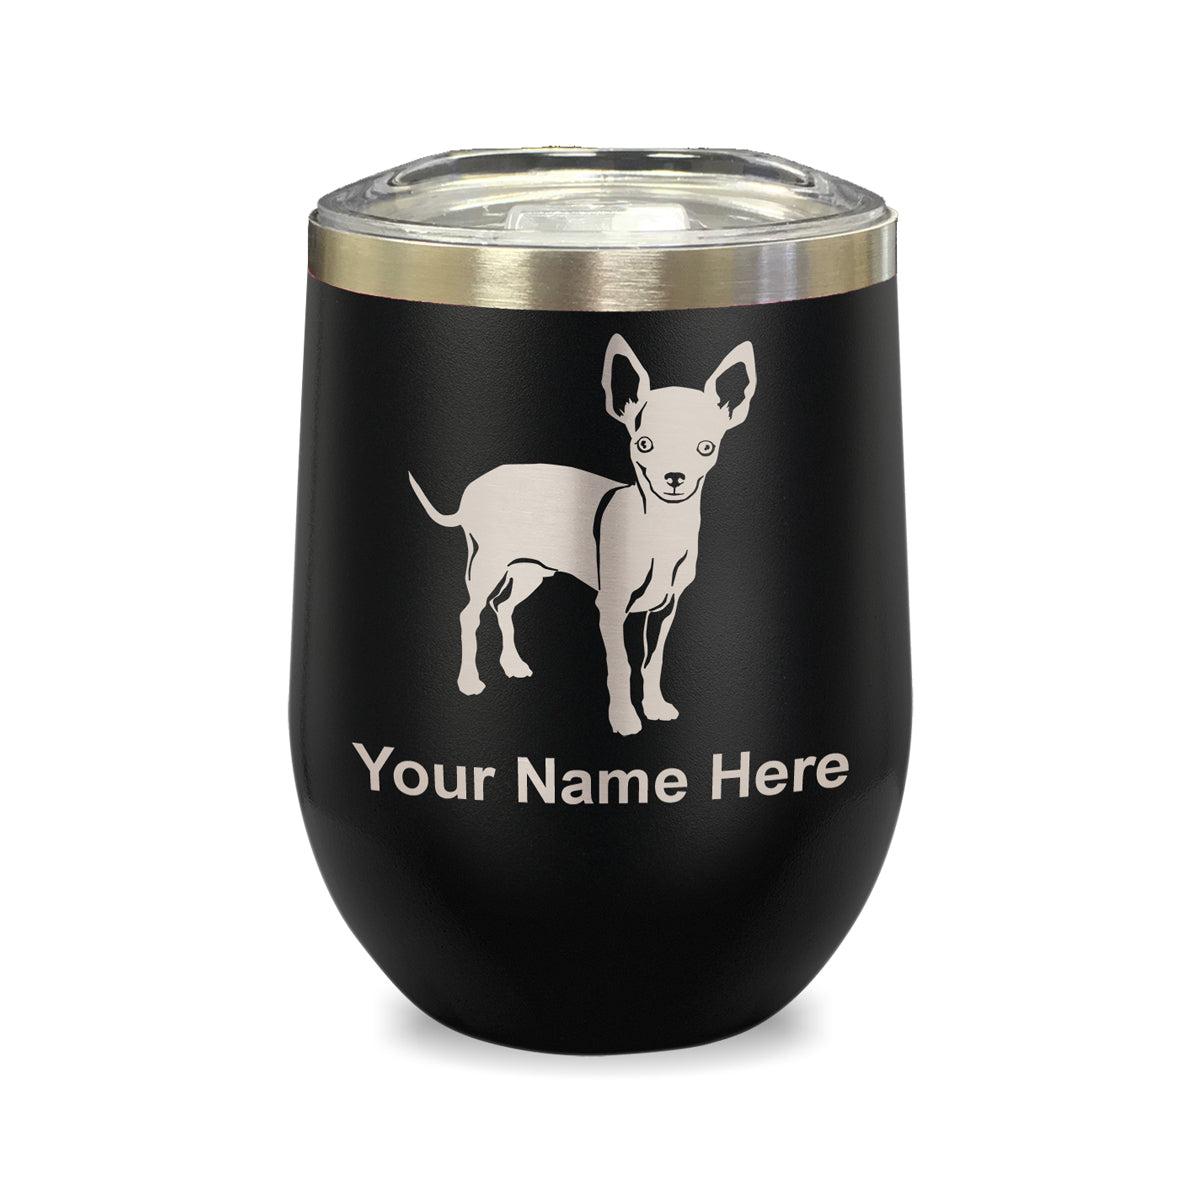 LaserGram Double Wall Stainless Steel Wine Glass, Chihuahua Dog, Personalized Engraving Included